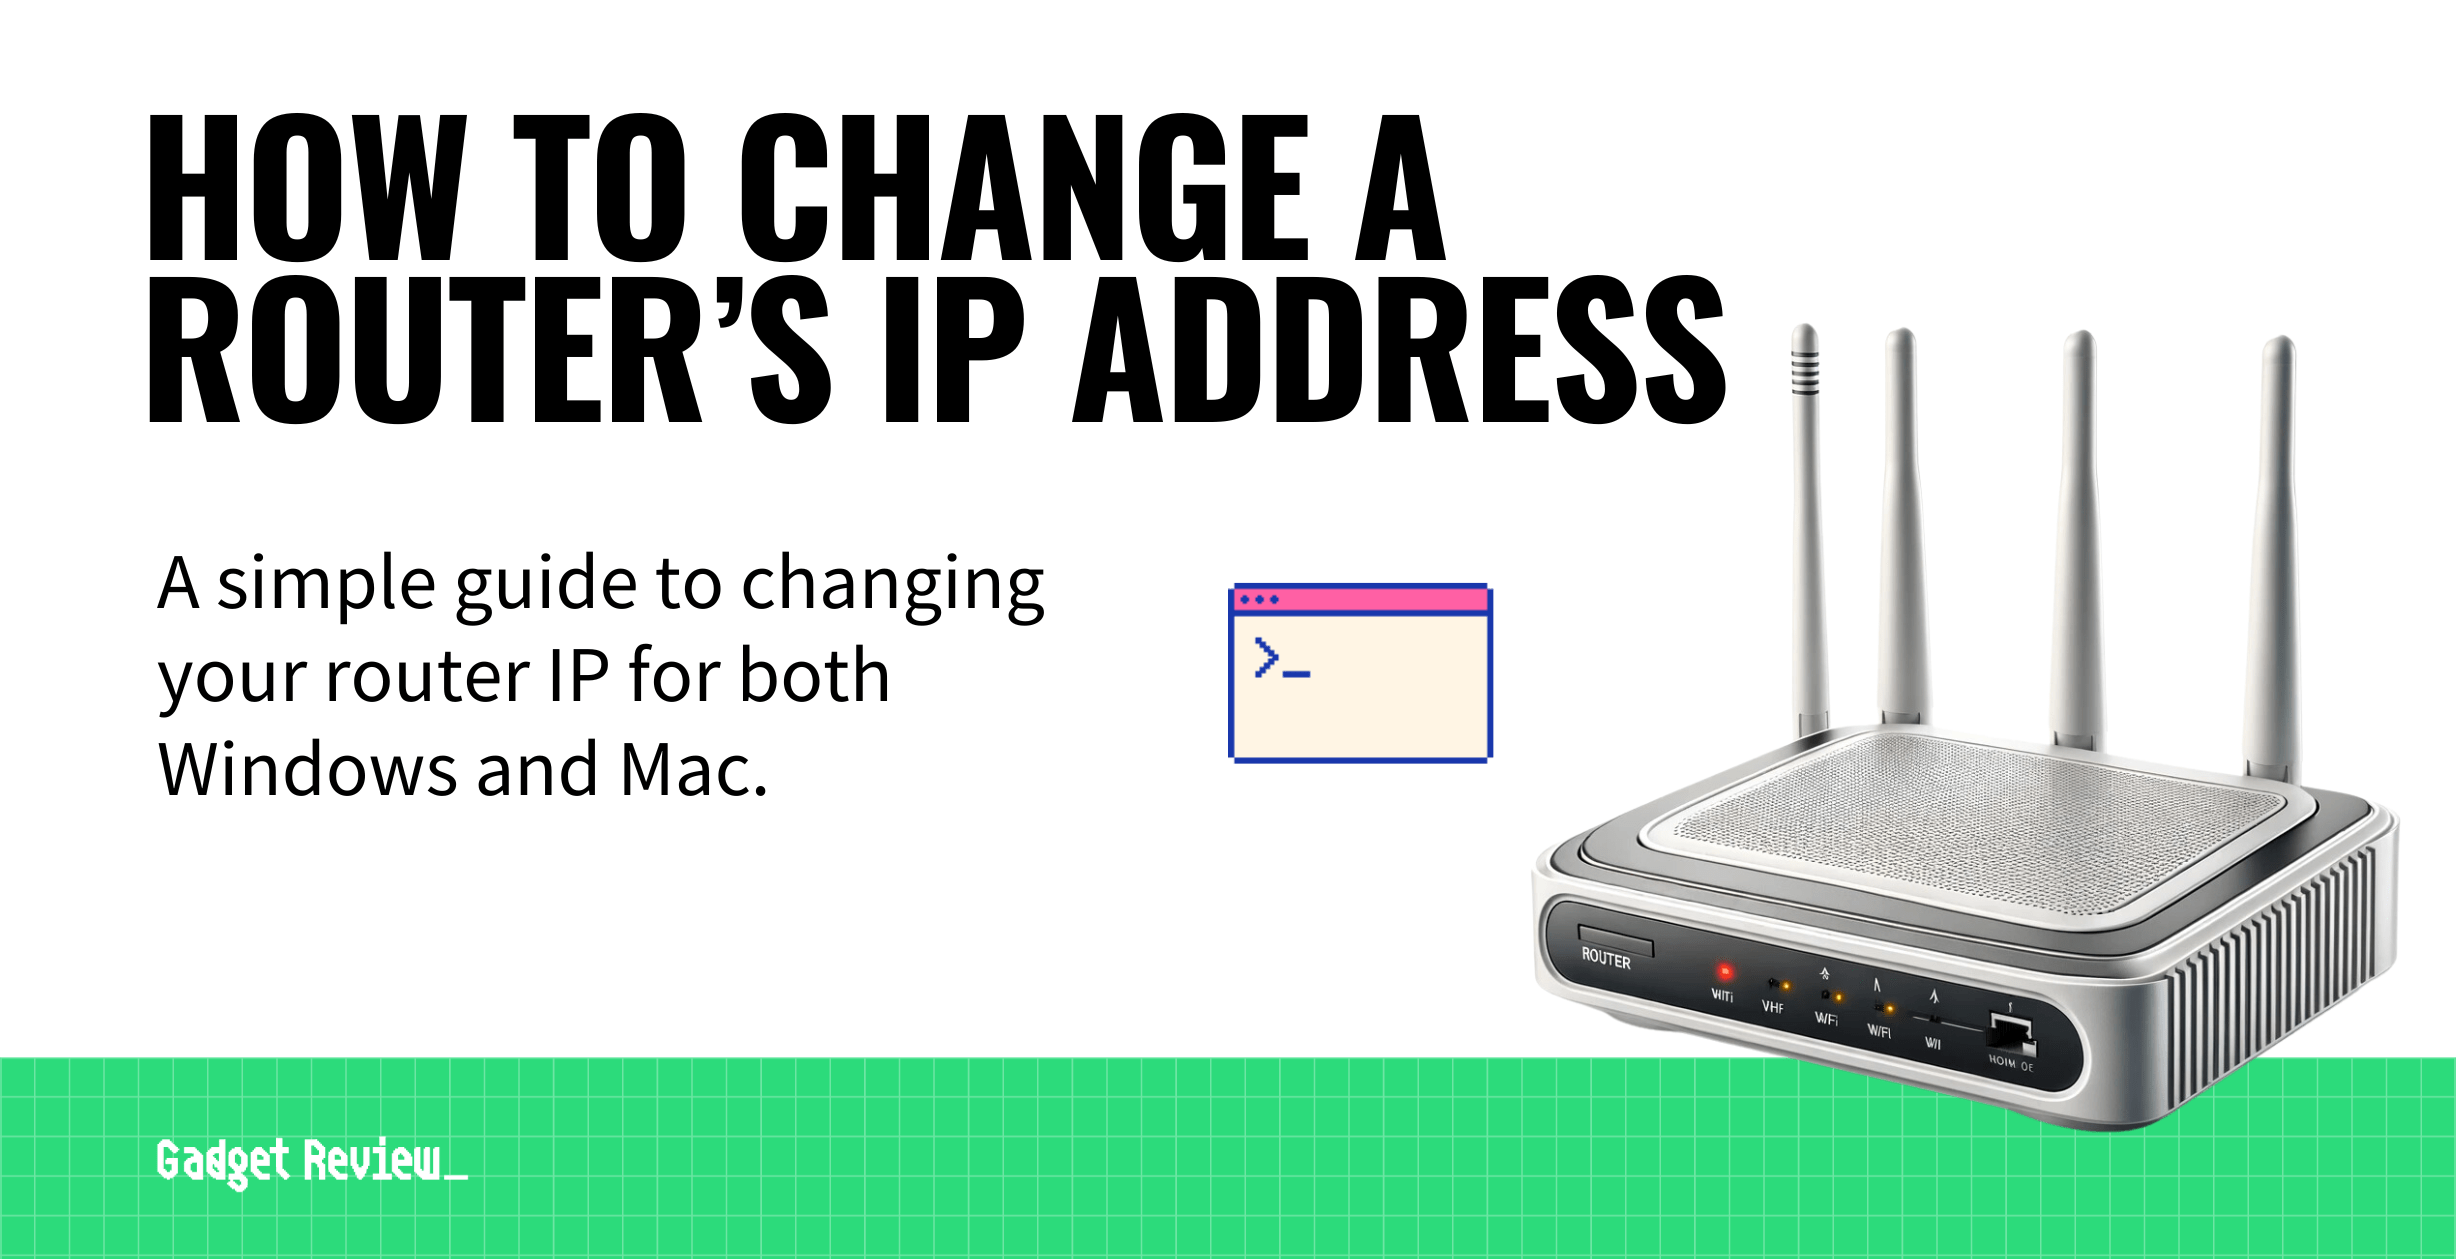 How to Change a Router’s IP Address